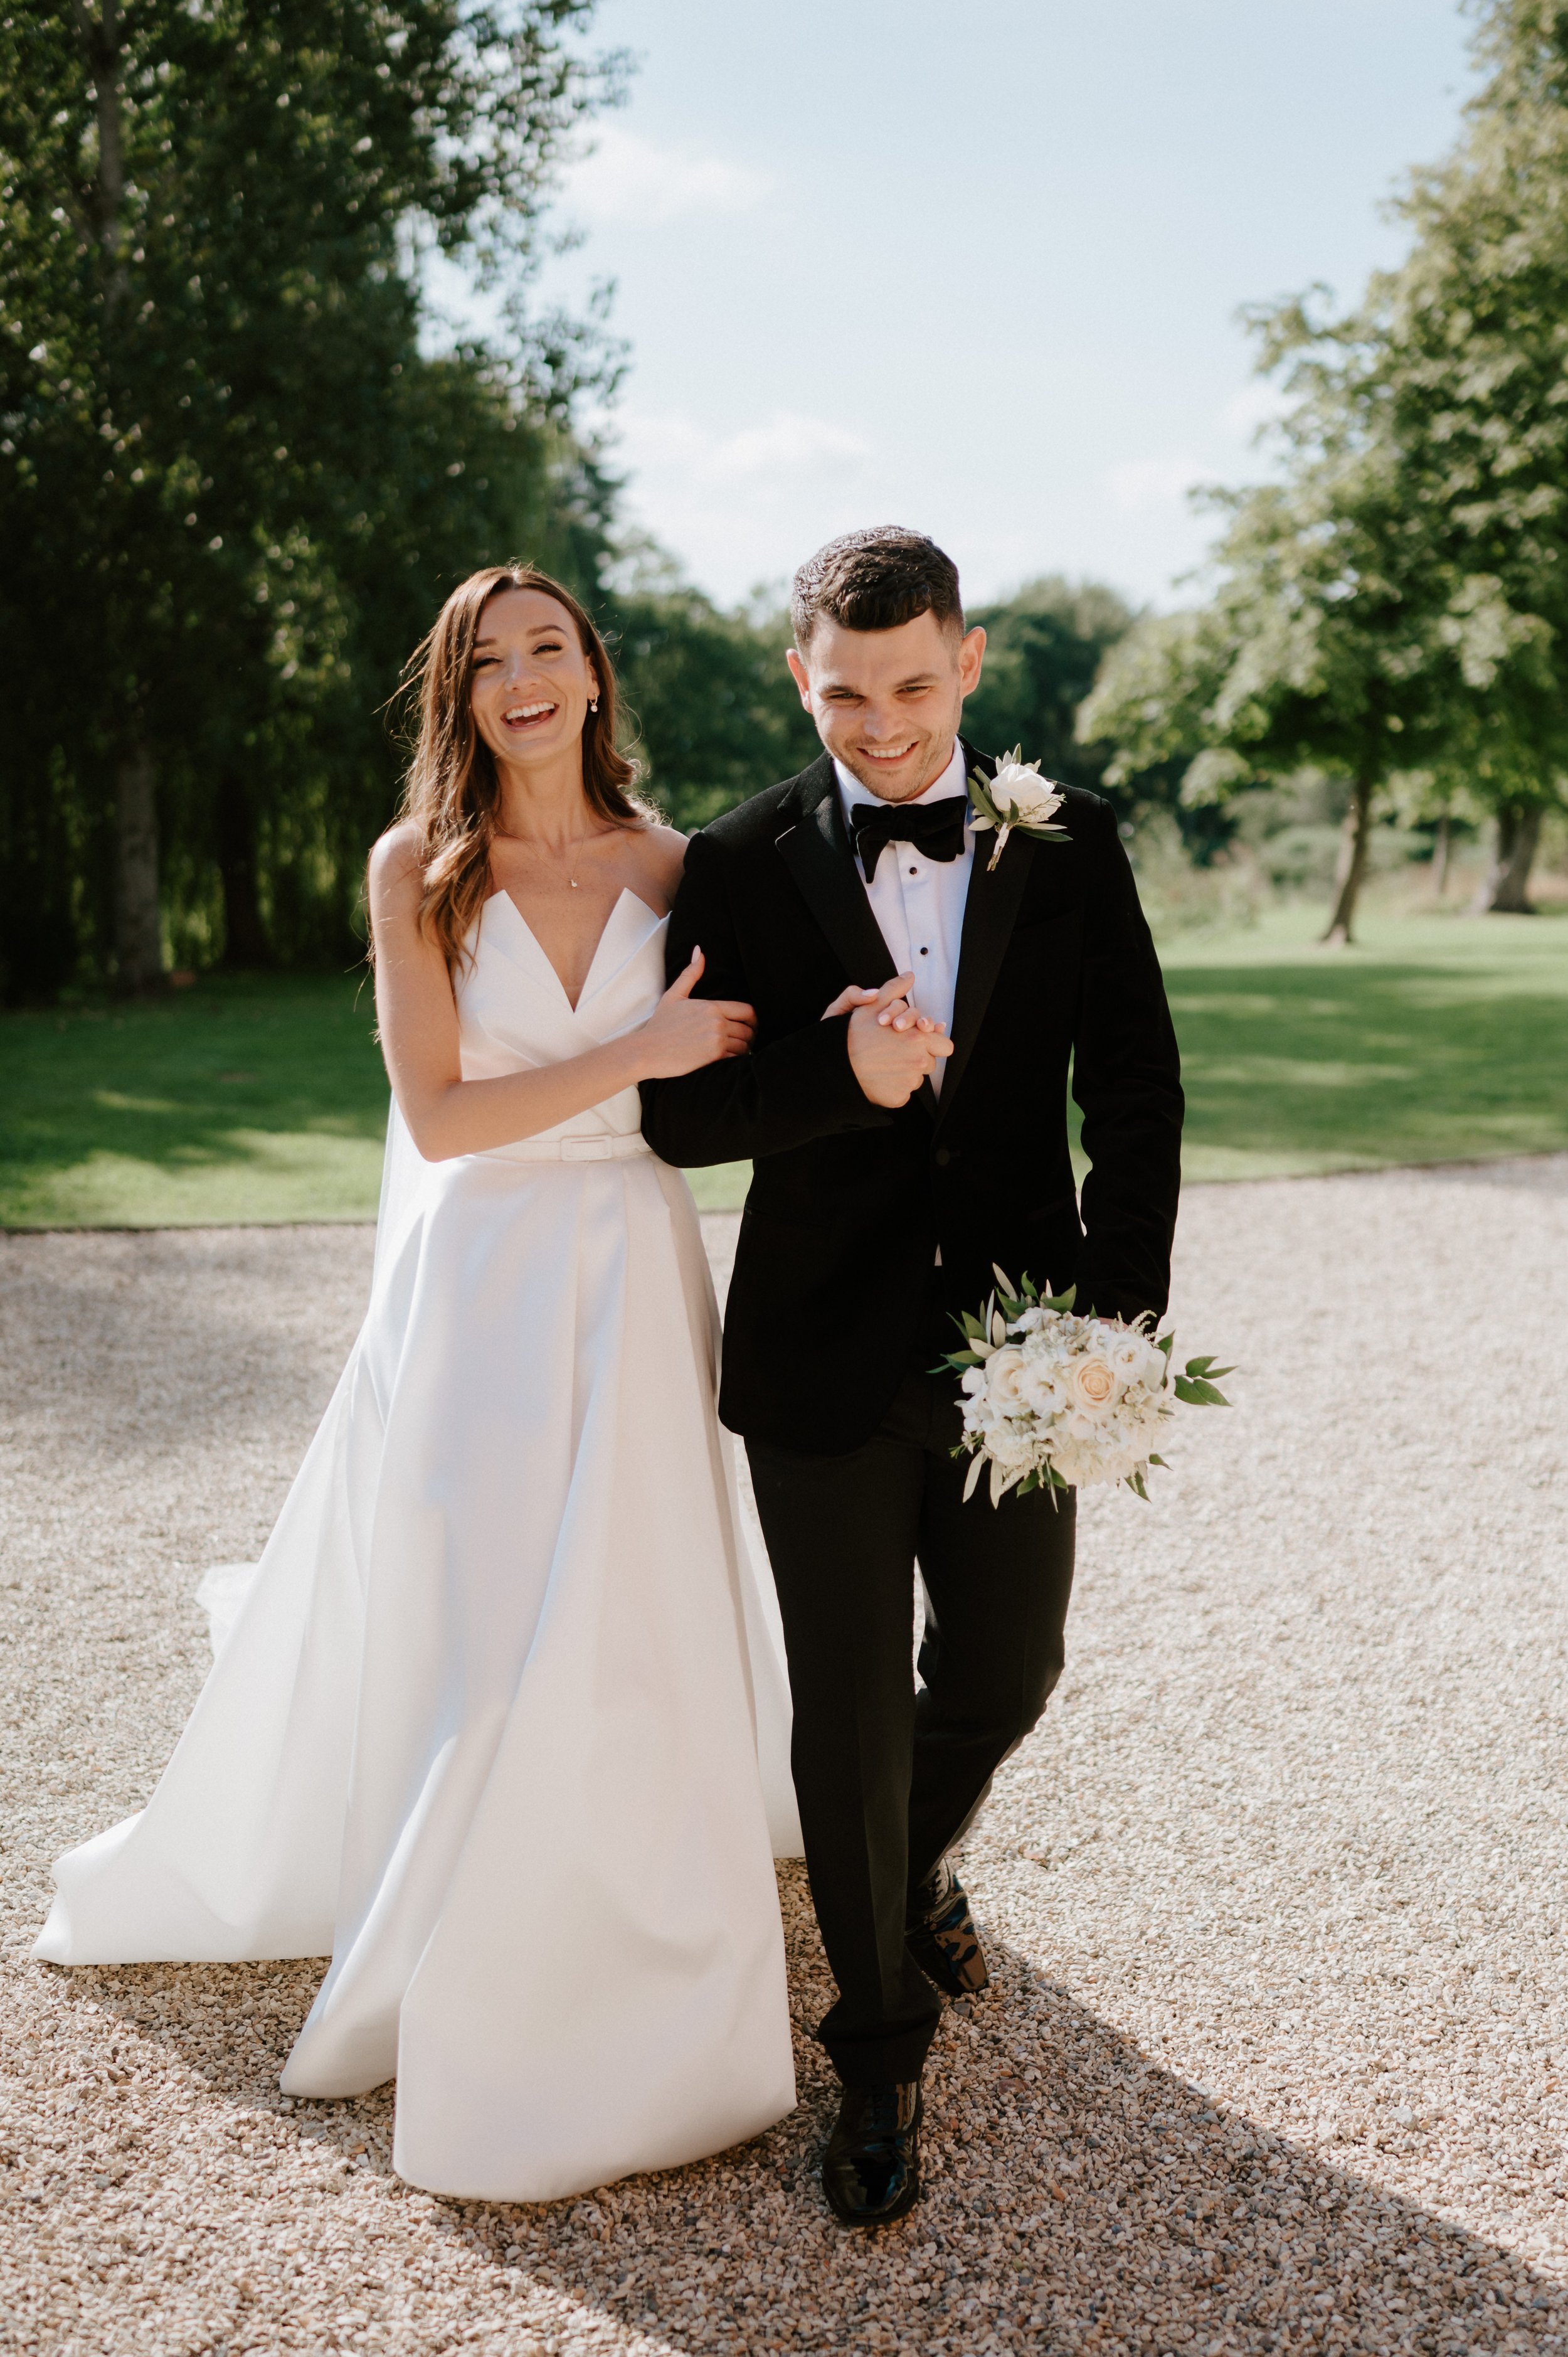 Rachel and Ross Previews - Laura Williams Photography - 67.jpg